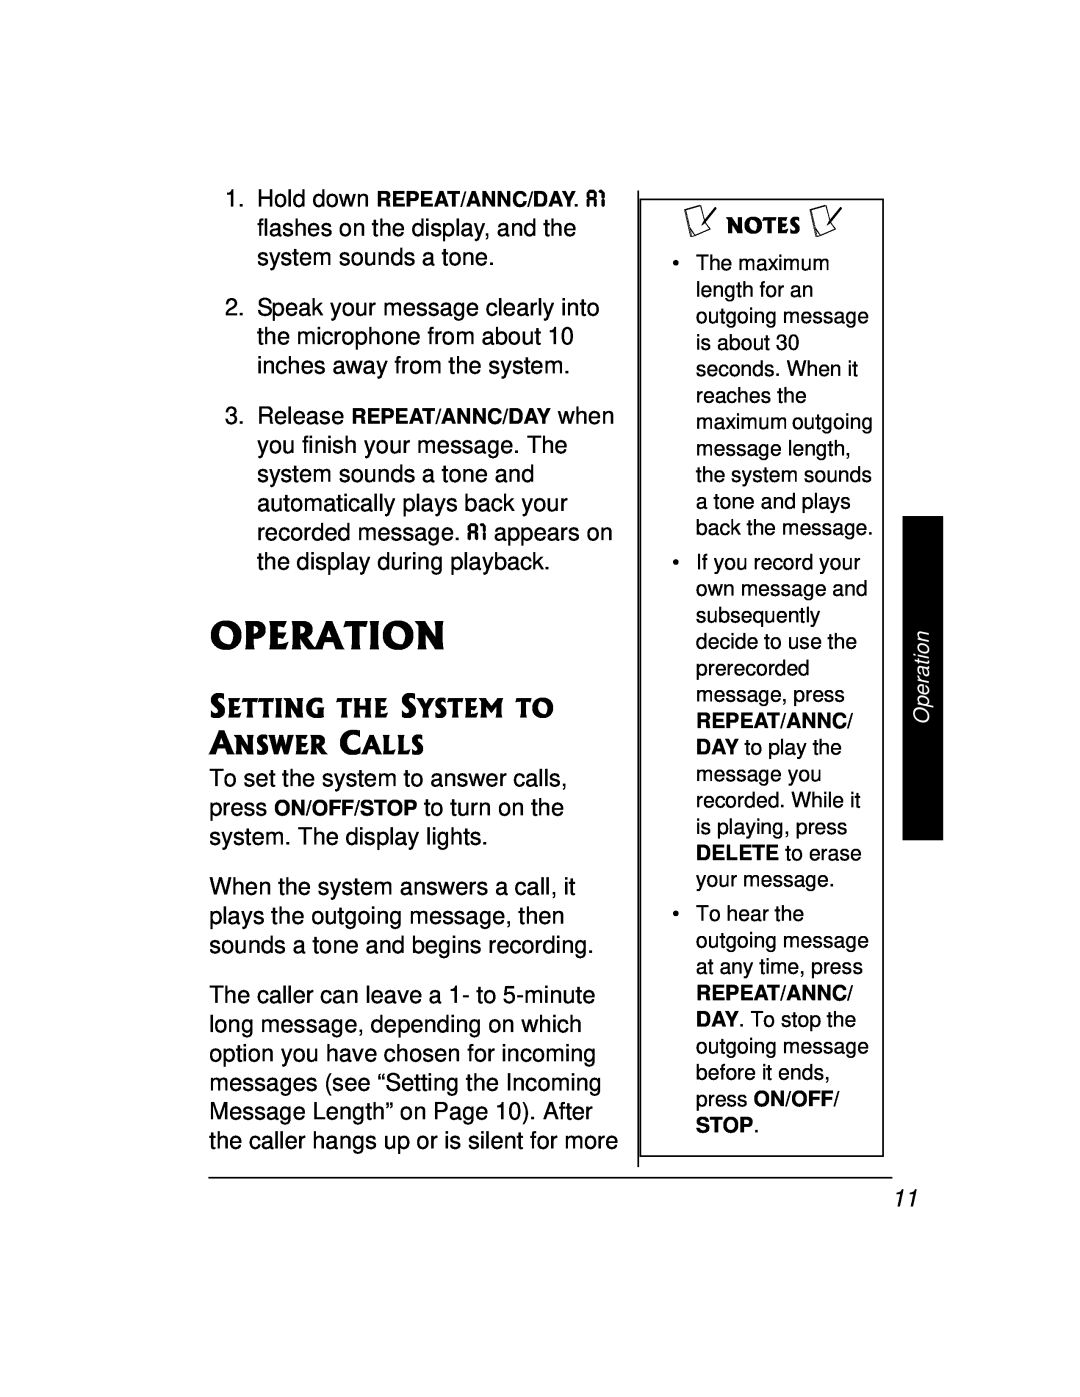 Radio Shack 43-3888 owner manual Operation, Setting The System To Answer Calls 